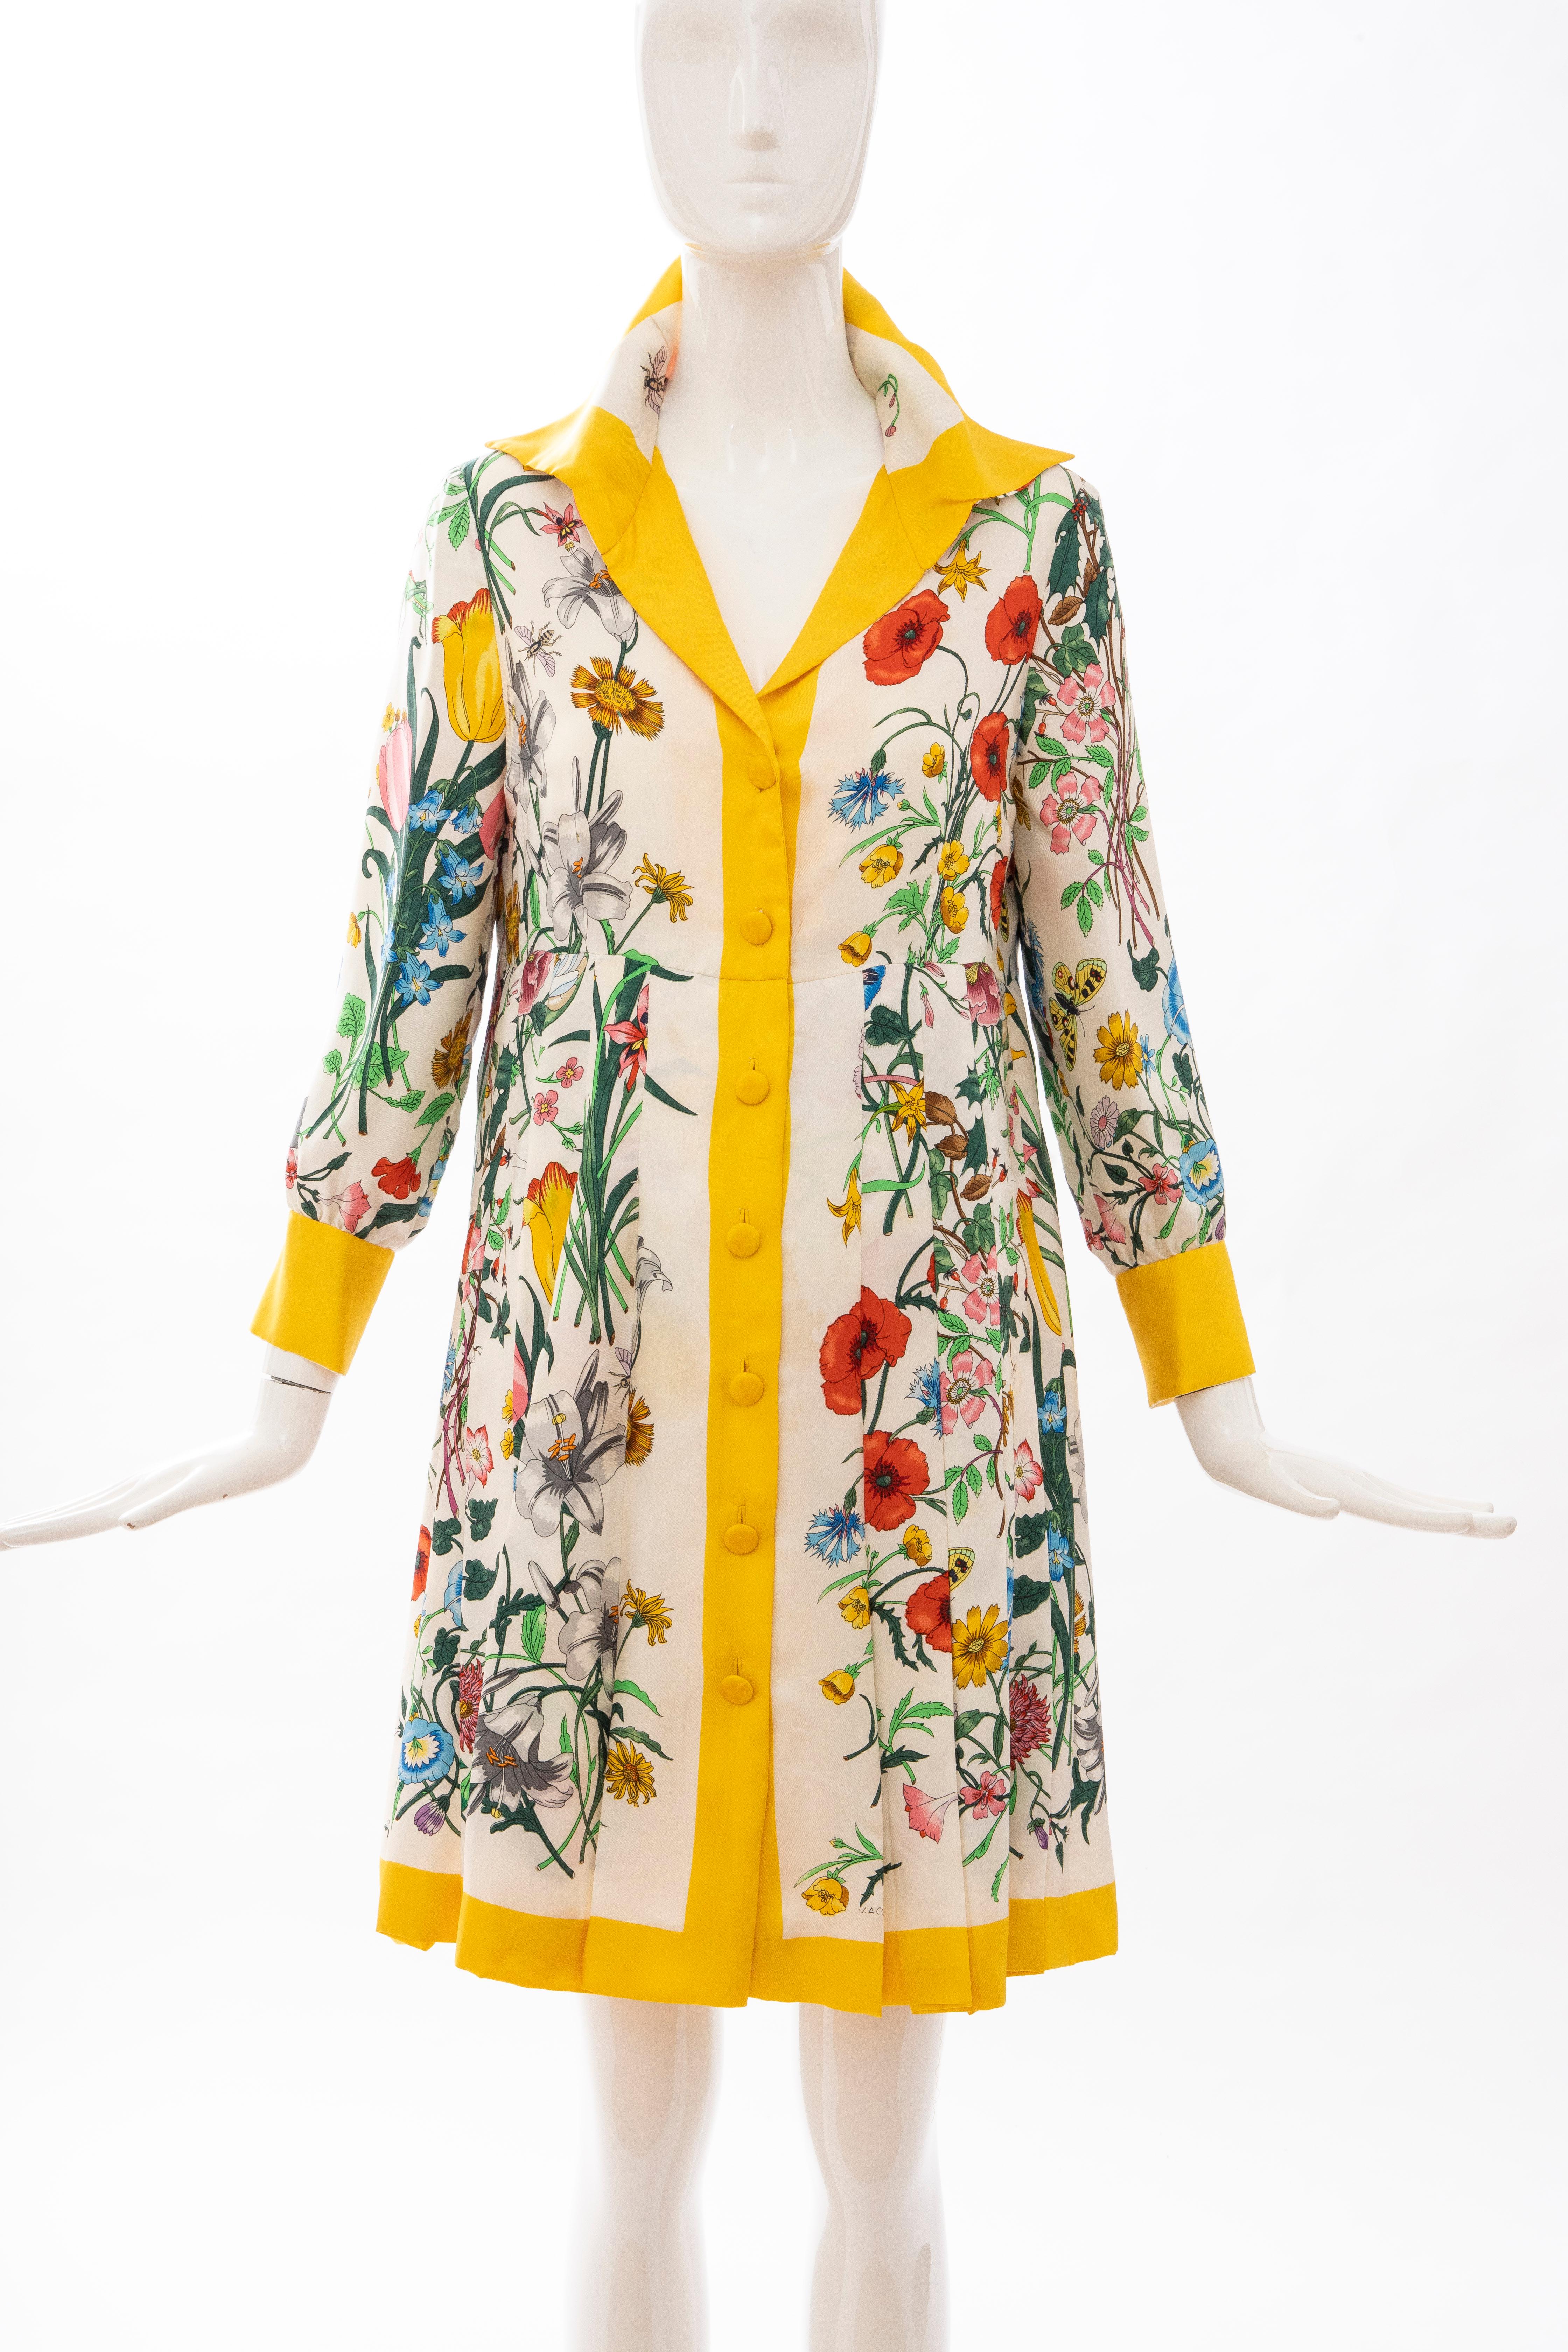 Gucci, Circa: 1970's Vittorio Accornero, Flora Fauna screen printed silk, yellow button front dress with pleated A-line skirt and fully lined in lightweight silk.

IT. 48, US. 12

Bust: 36, Waist: 35, Hip: 48, Shoulder: 15.5, Sleeve: 21, Length: